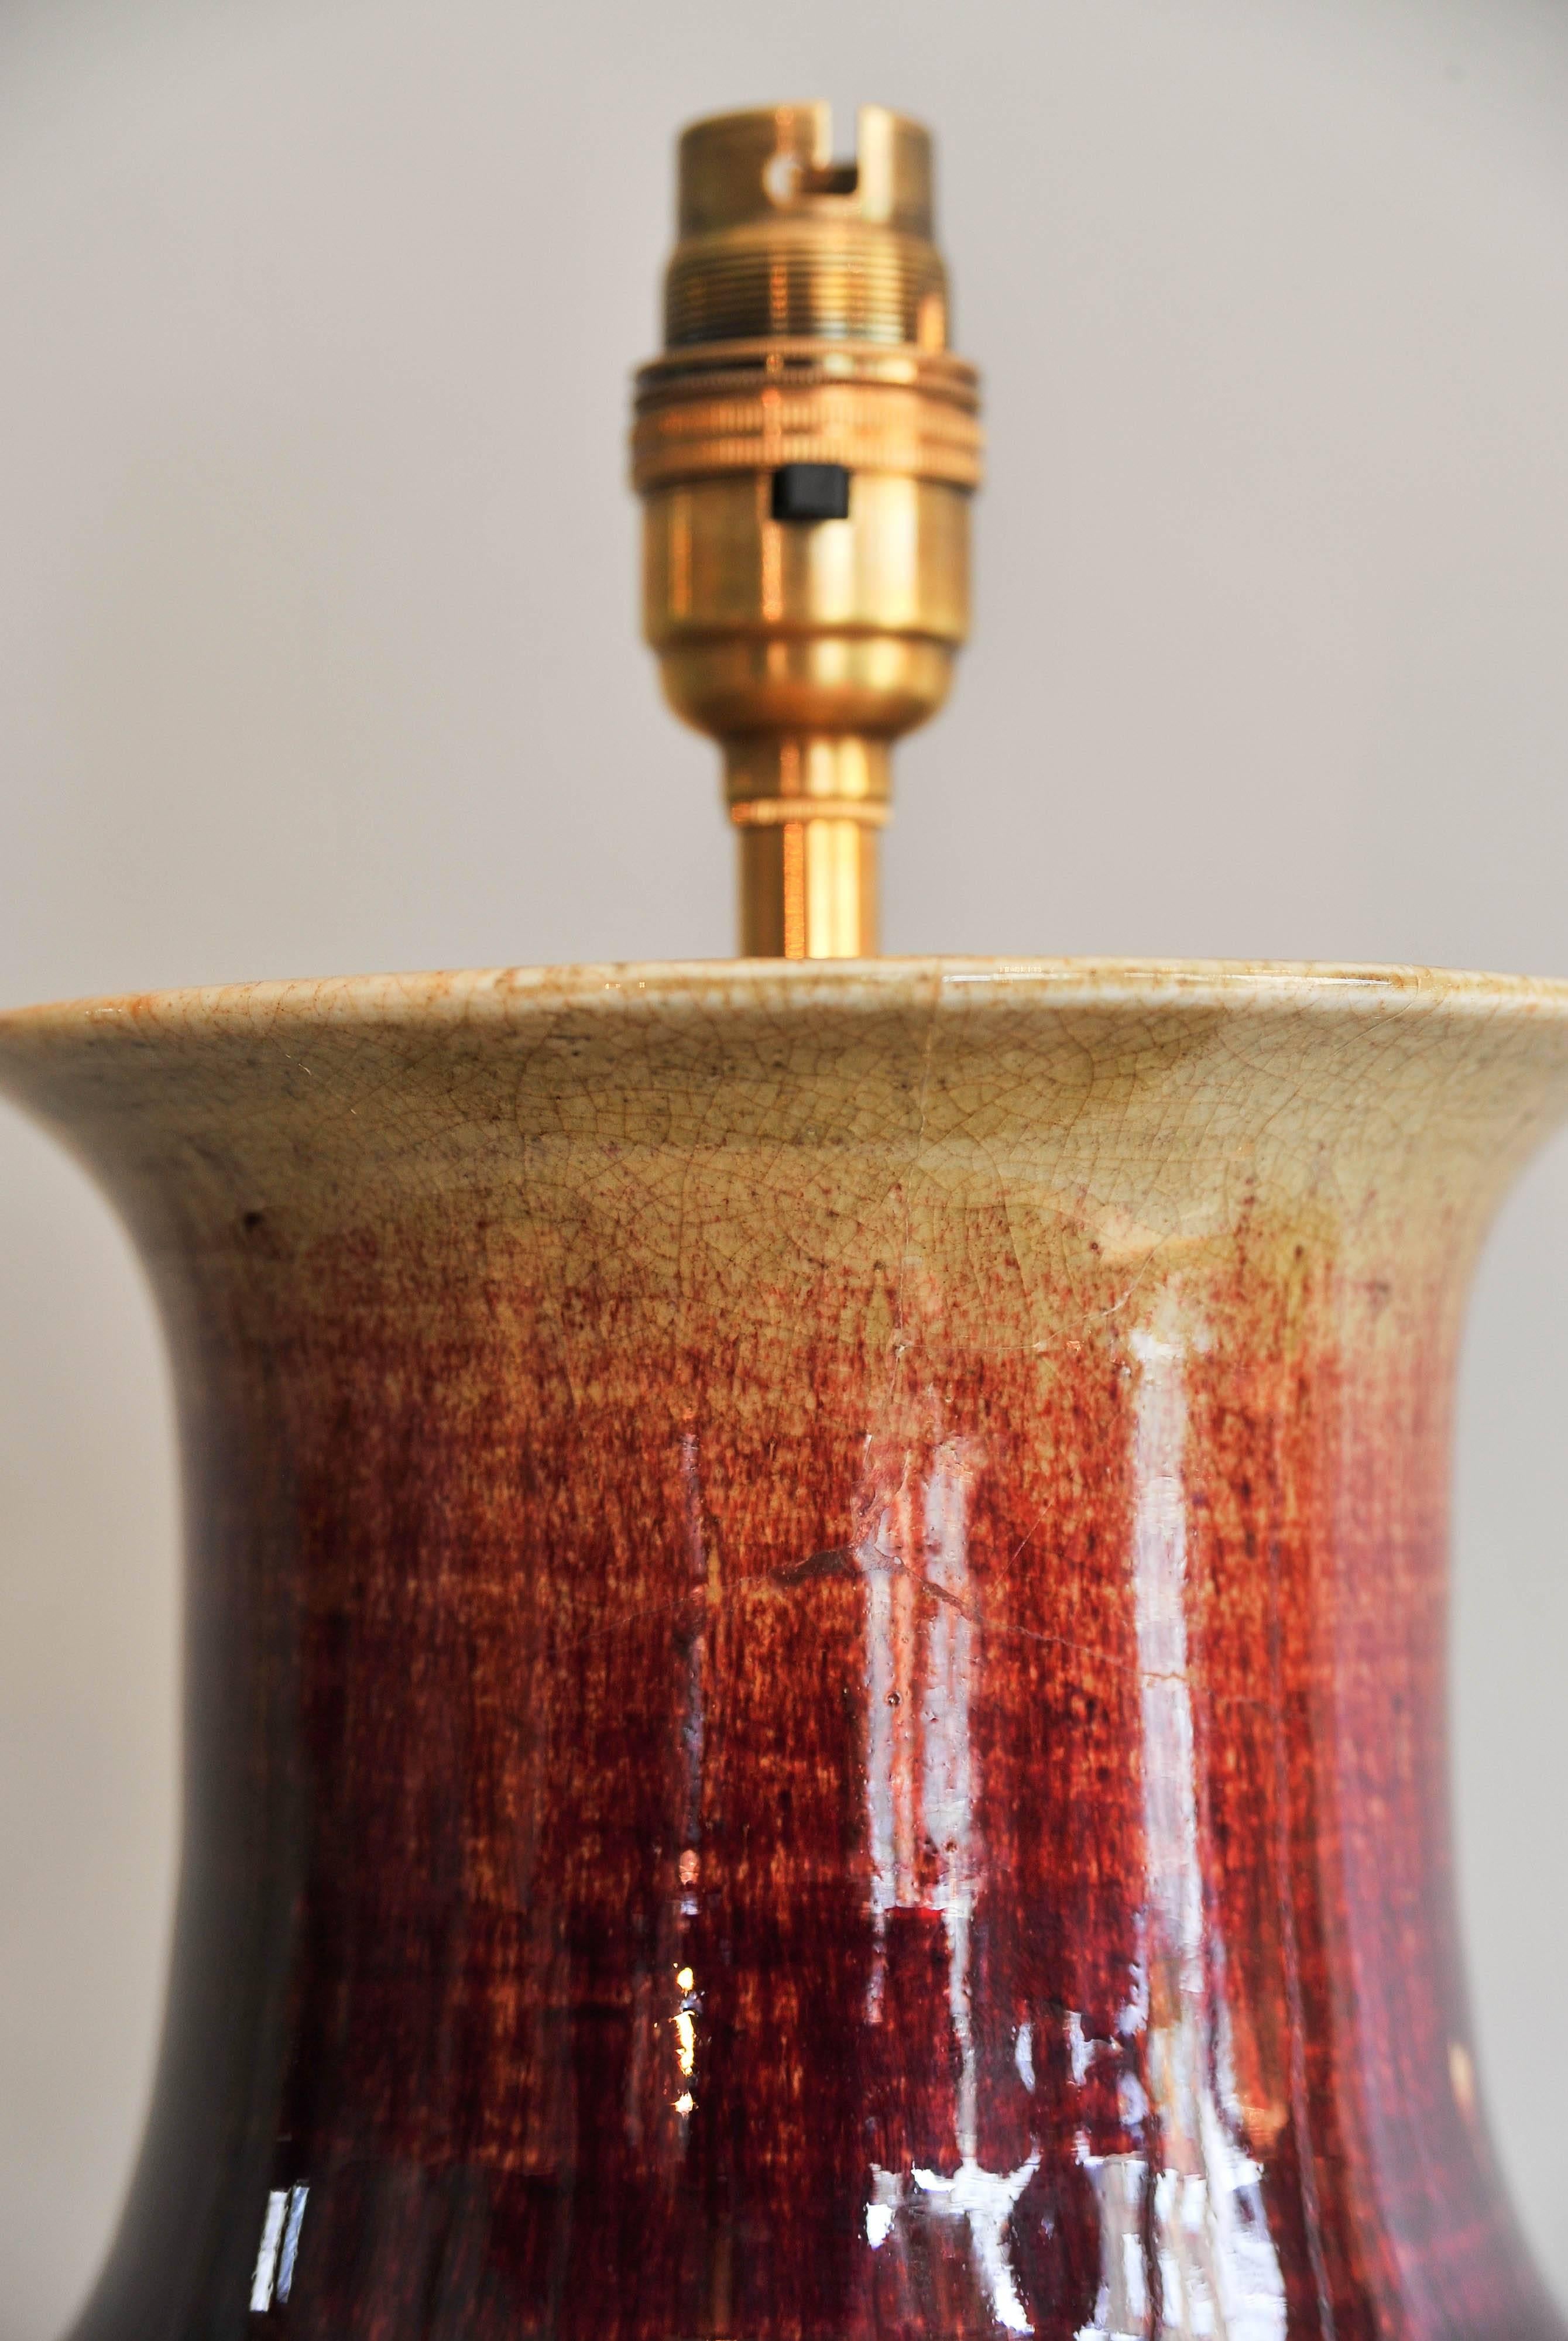 A period (circa 1850) tall Chinese oxblood vase featuring a rich and deep red color with purple shades.
Vase height 40 cm- 15 in.
Lamped with a hand-carved and gilted wooden base.